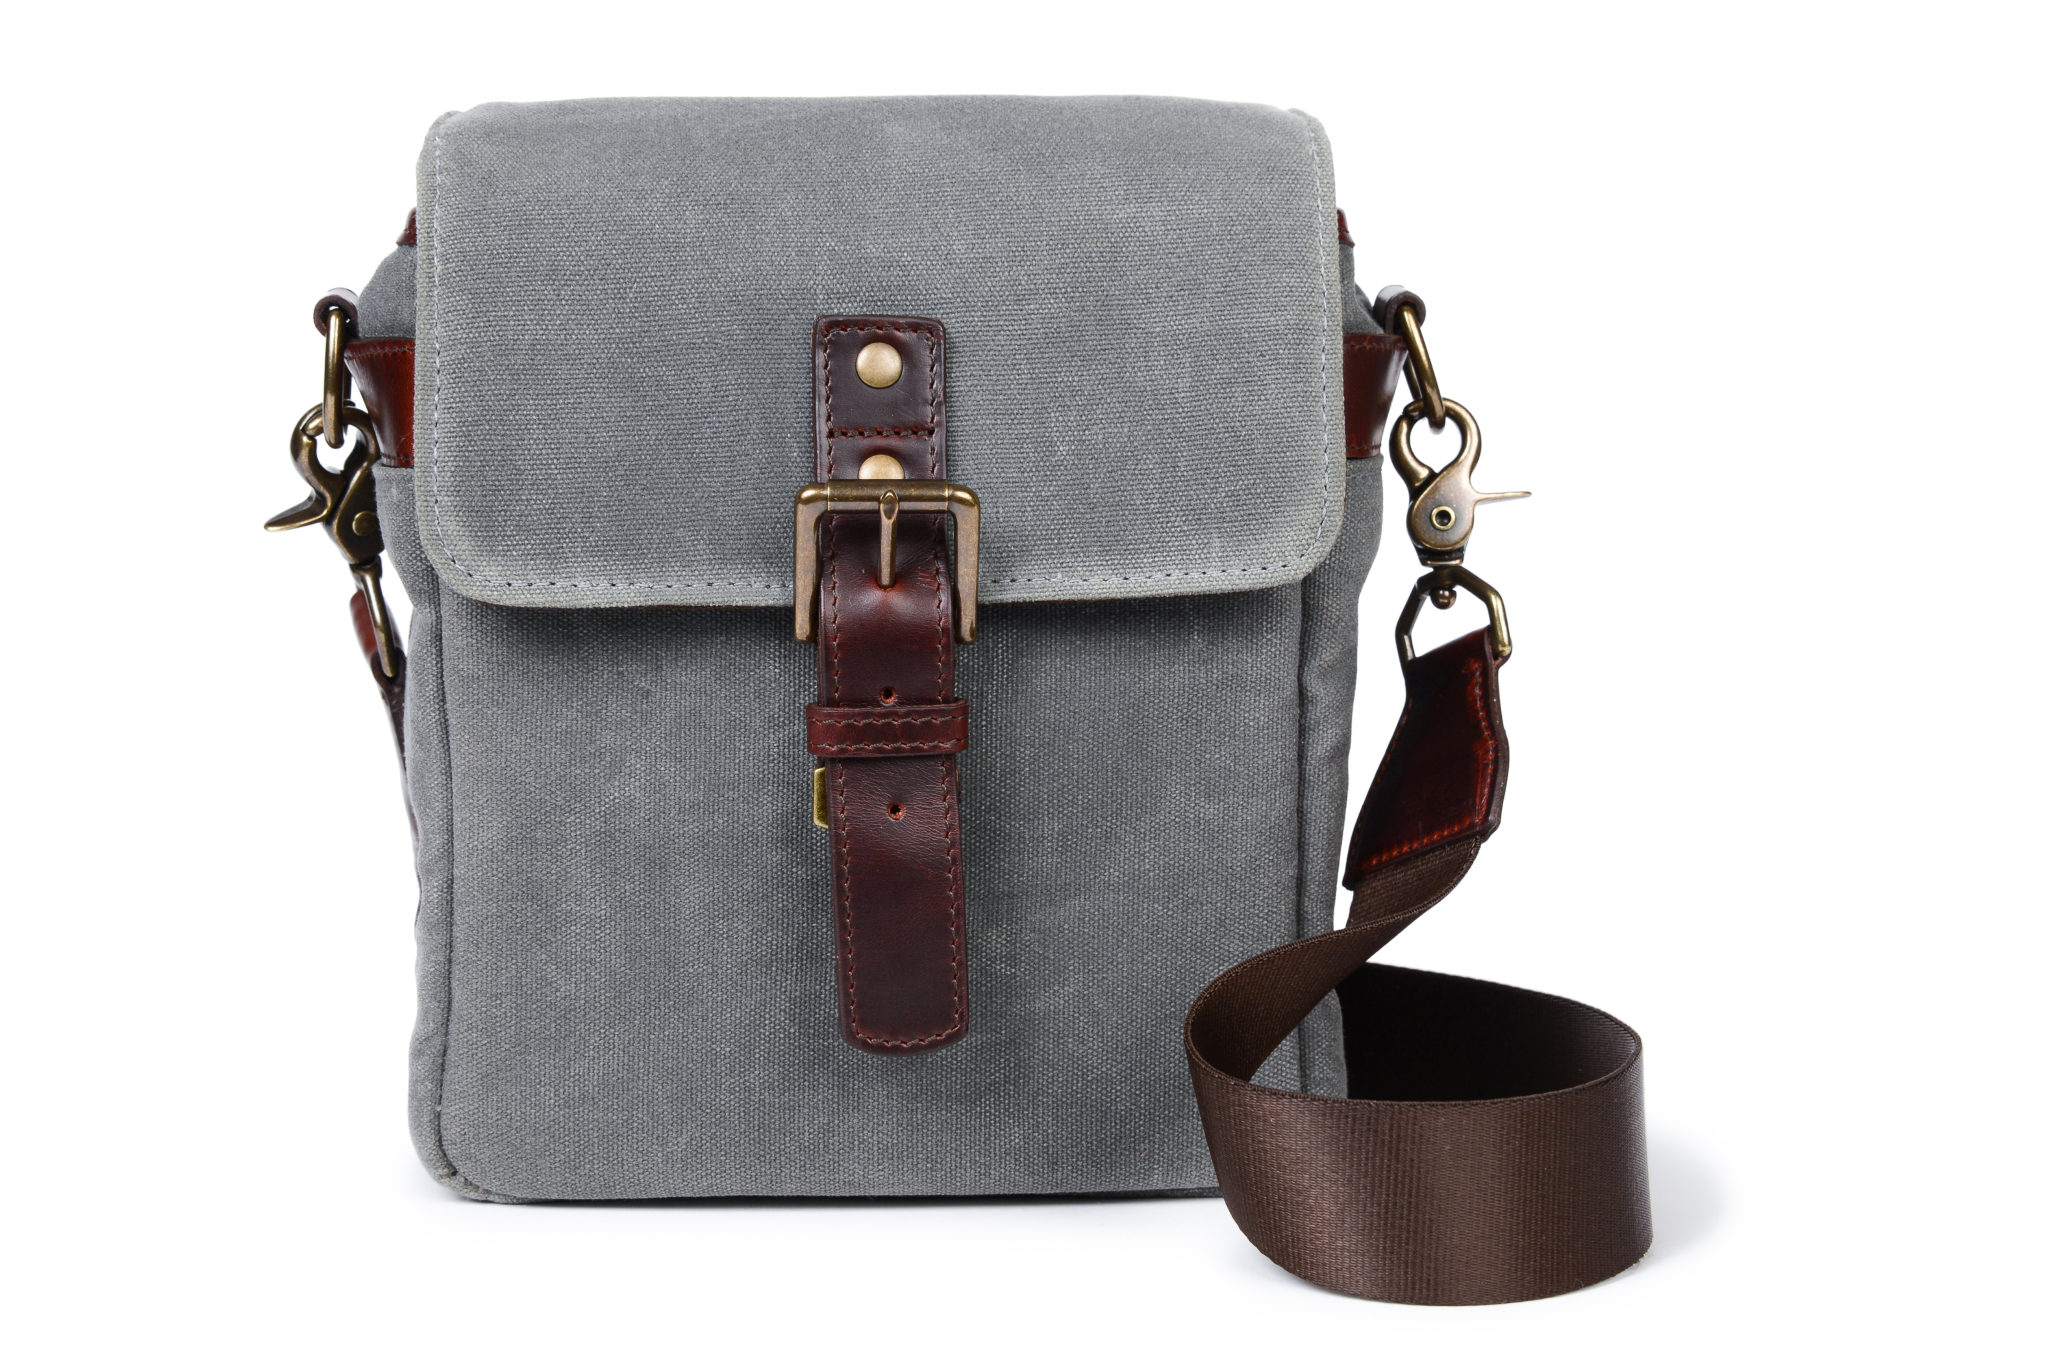 ONA Launches New Styles for Bond Street Bag; Kyoto Wrist Strap And ...